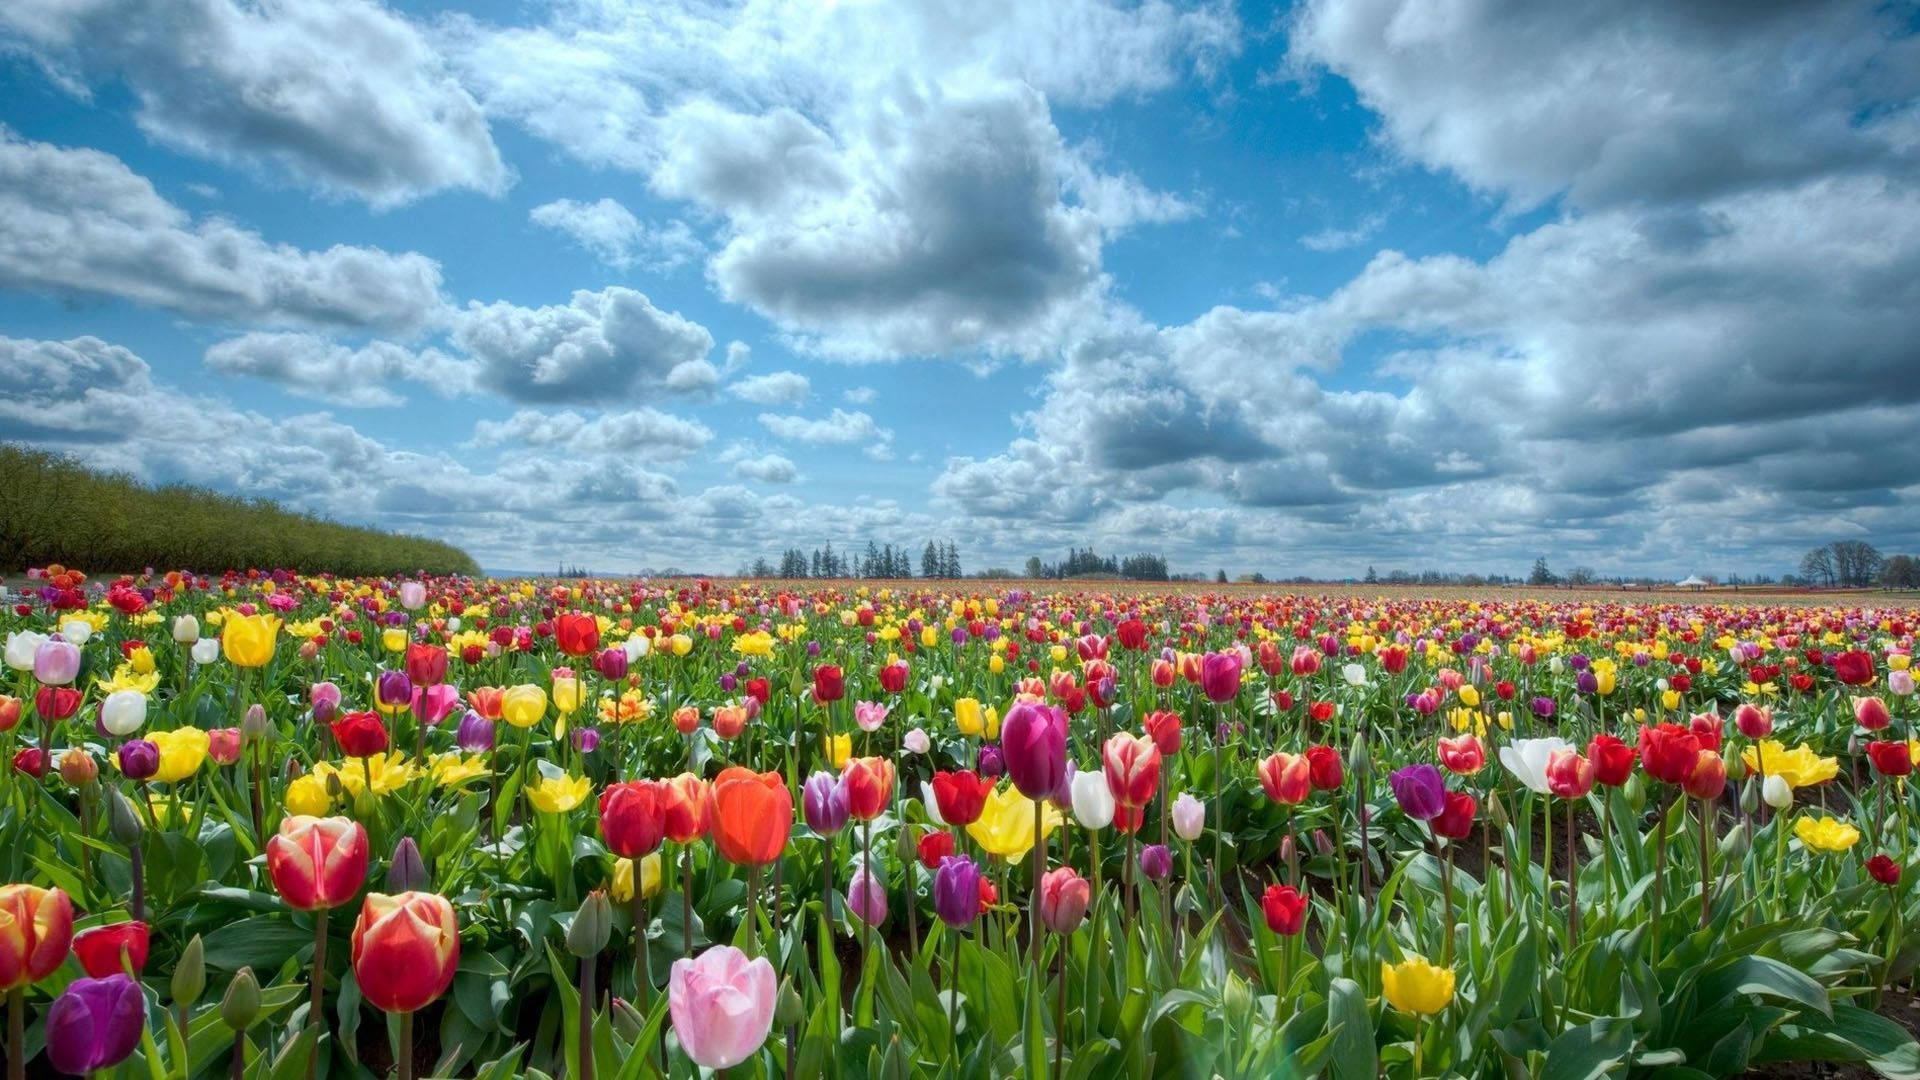 A stunning sea of tulips in bloom Wallpaper